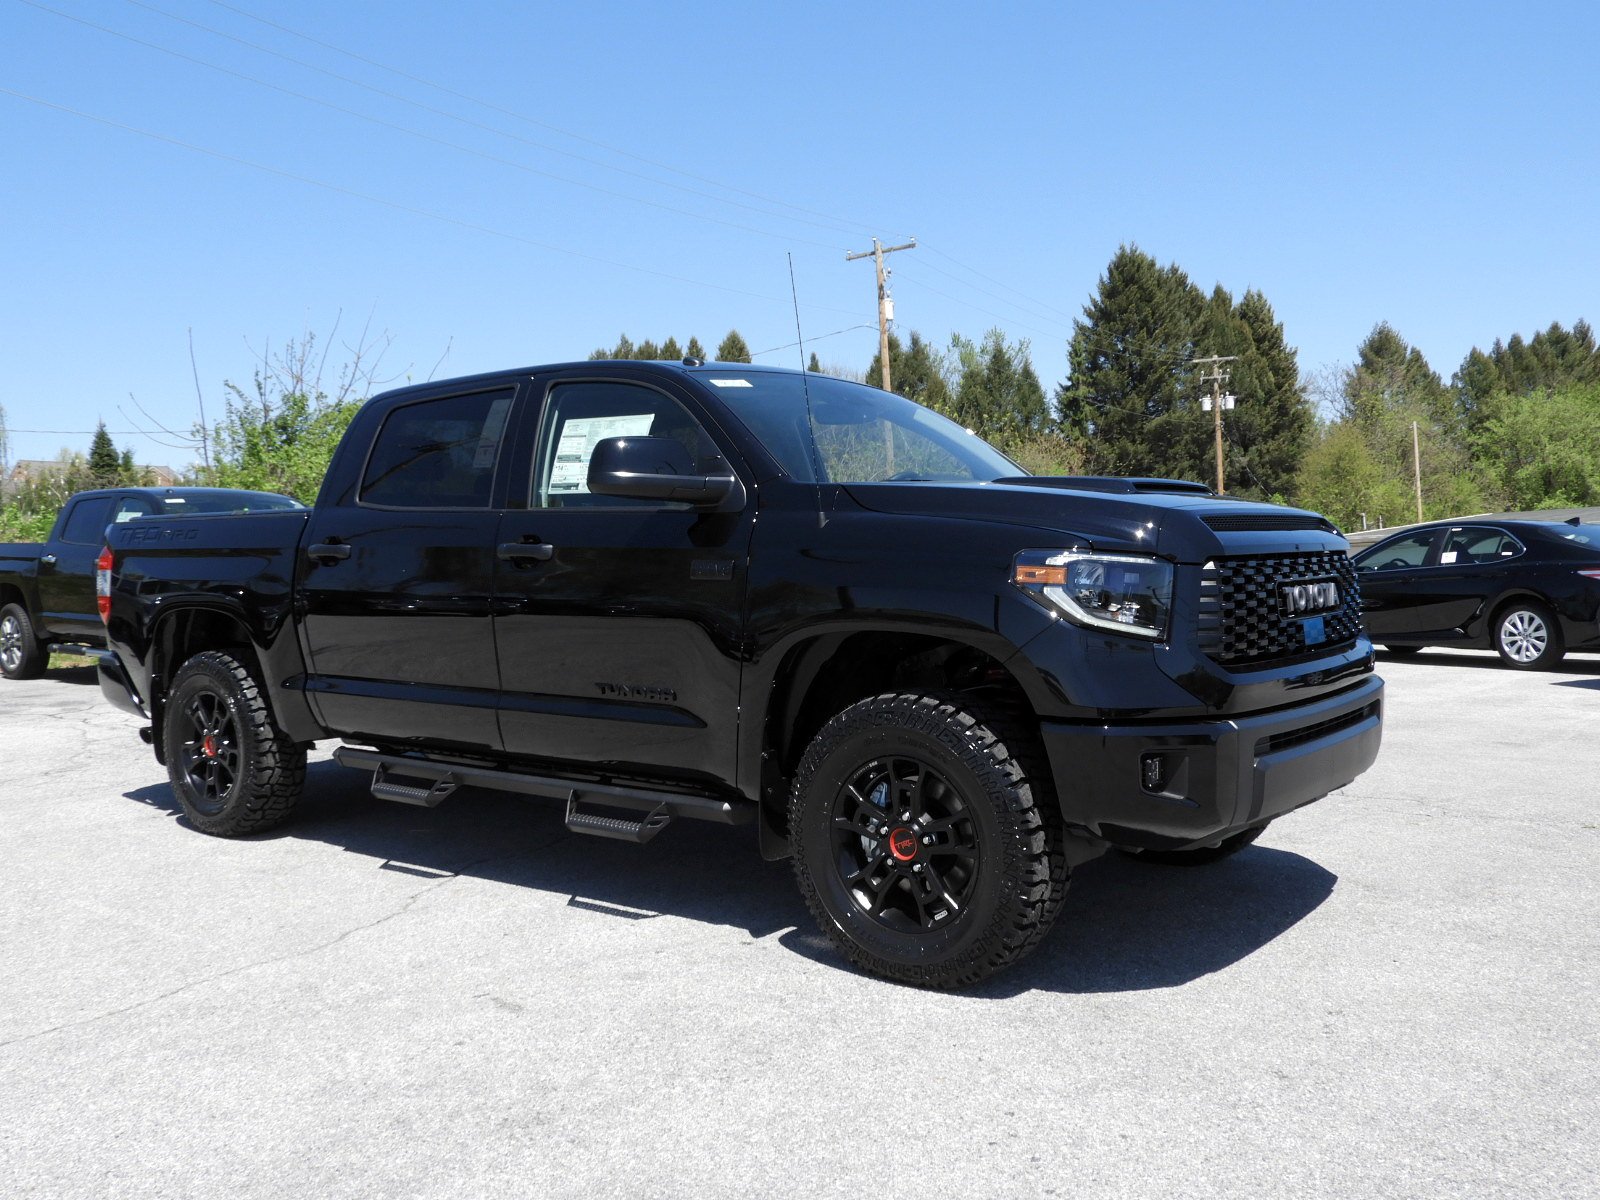 New 2019 Toyota Tundra 4WD TRD Pro Crew Cab Pickup in Sinking Spring